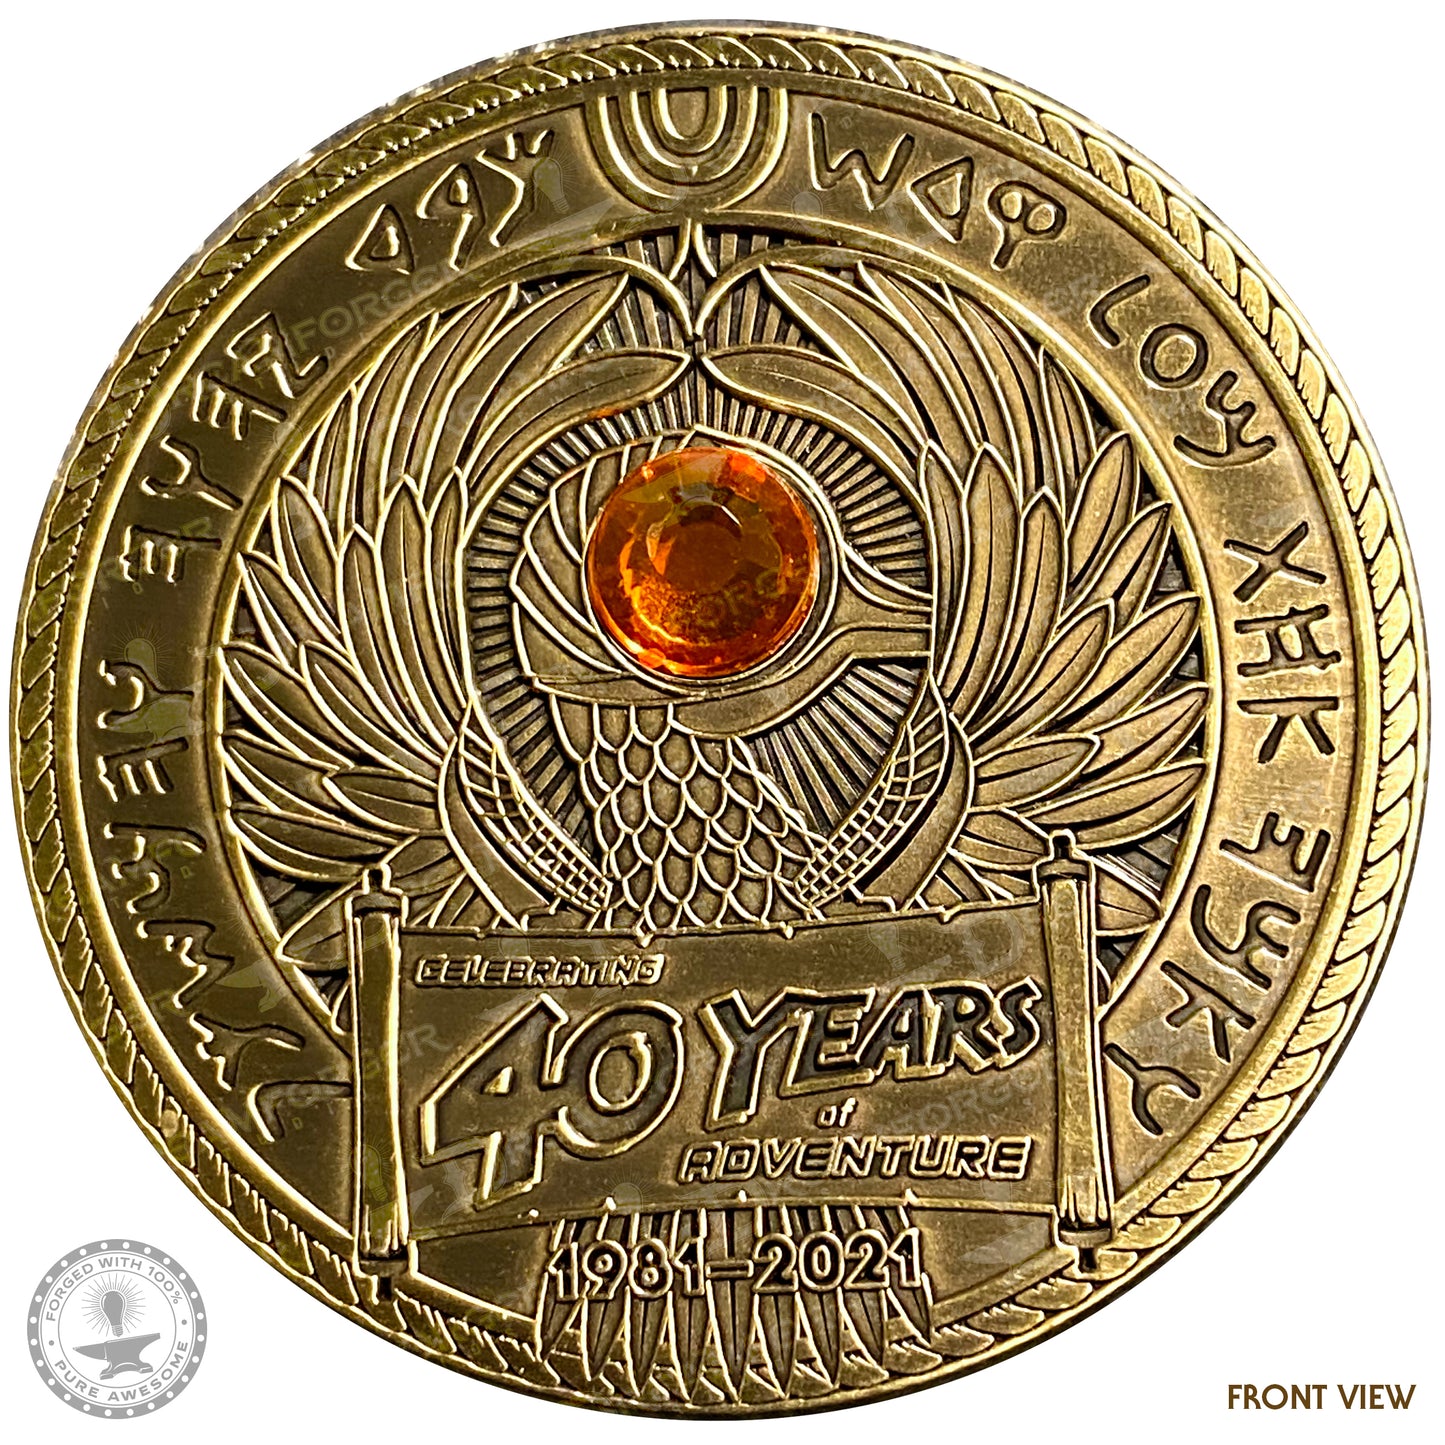 "40 Years of Adventure" Metal Collector Coin